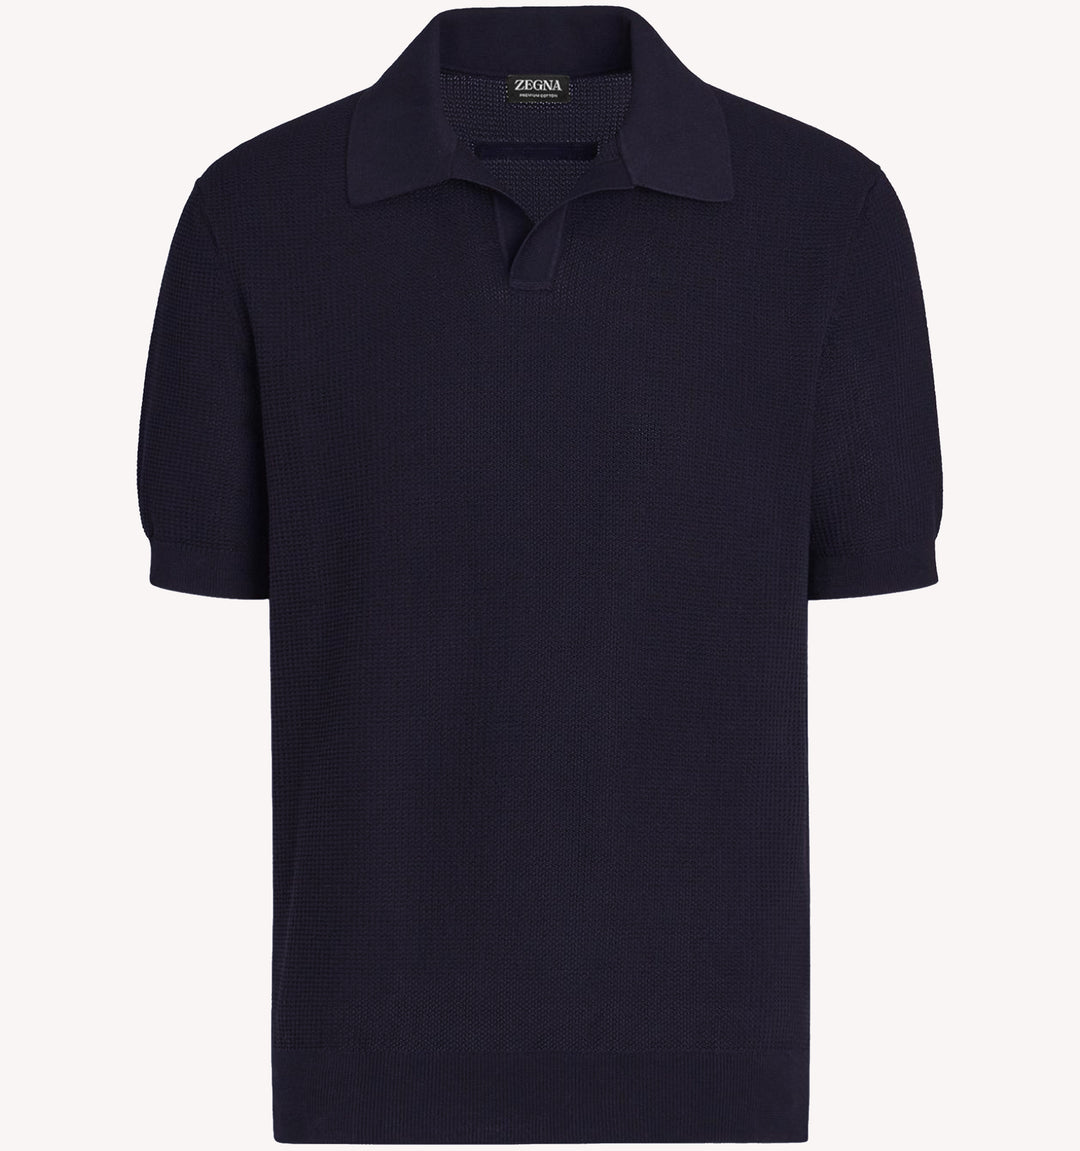 Zegna Knit Polo in Navy